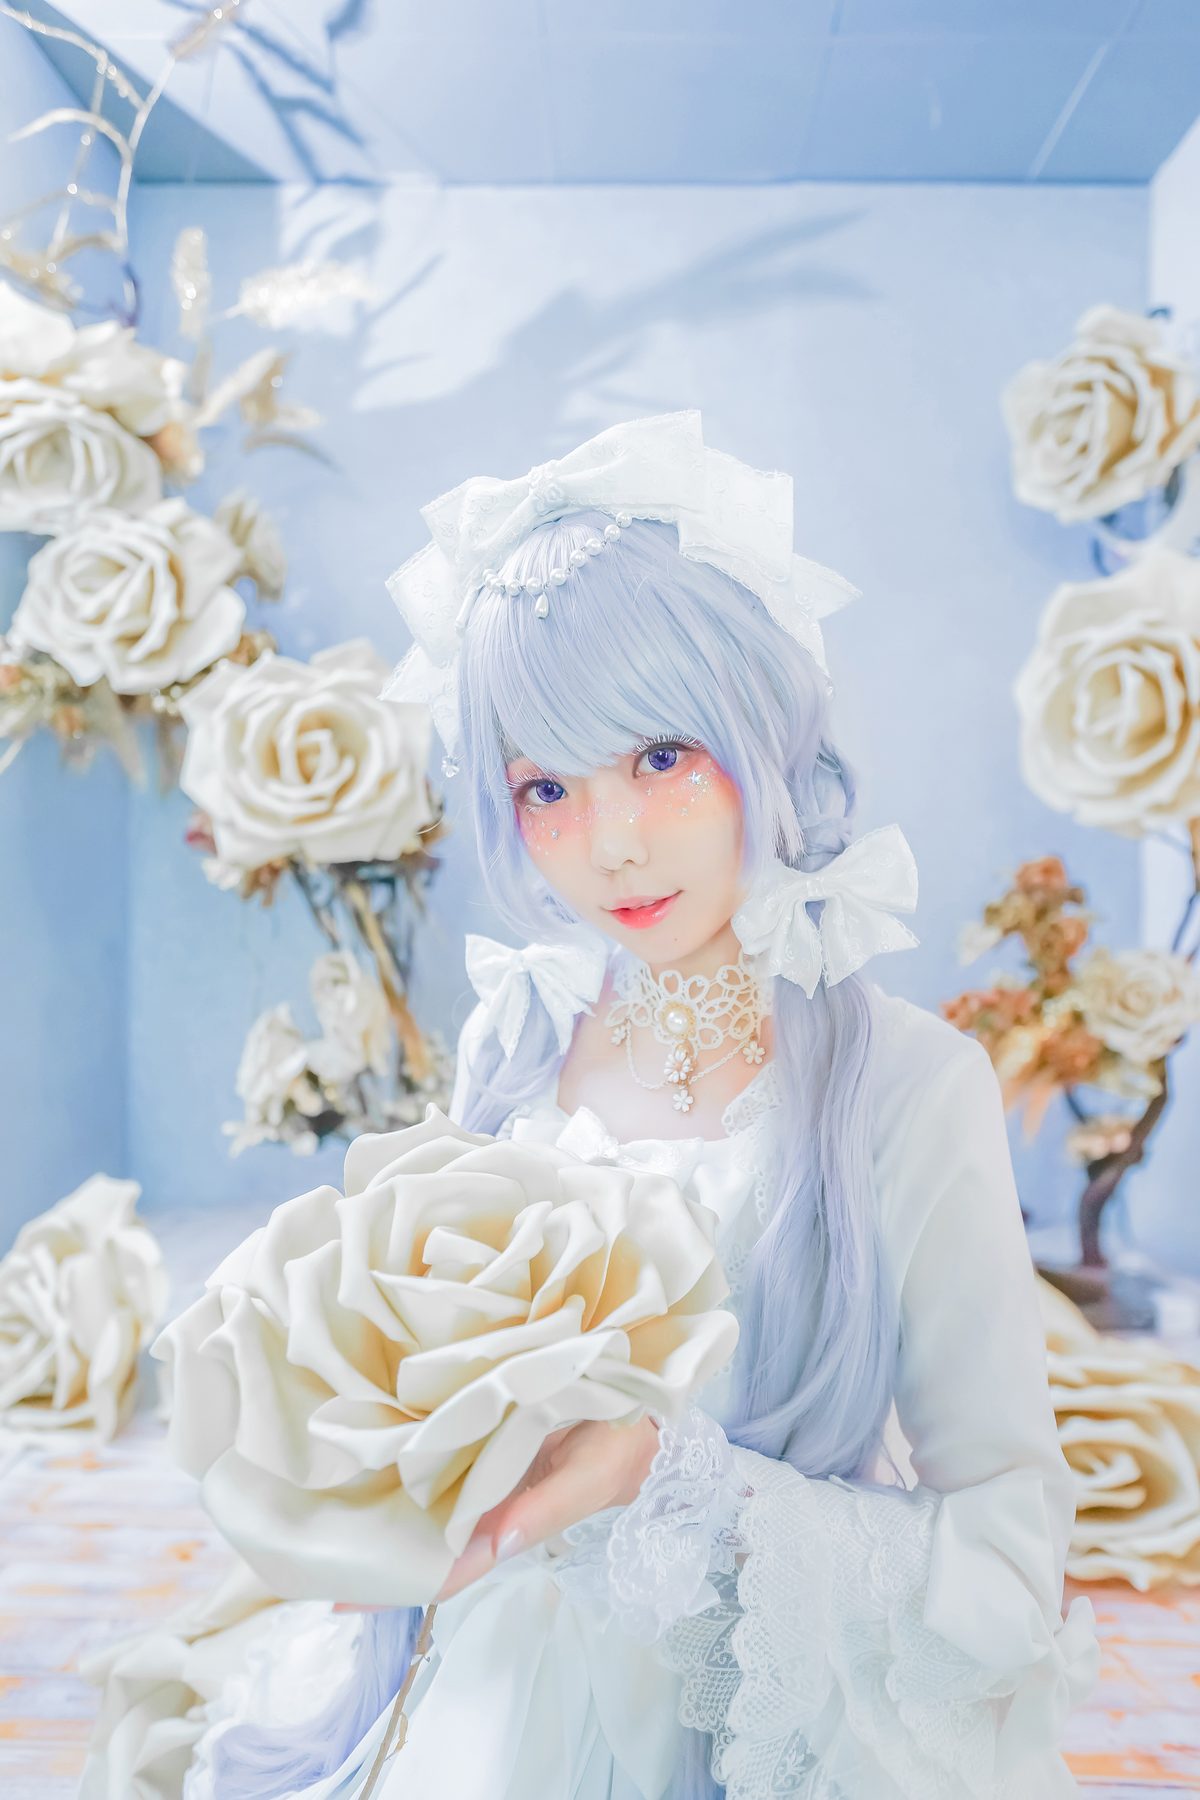 Coser@Ely_eee ElyEE子 TUESDAY TWINTAIL A 0070 5053987926.jpg